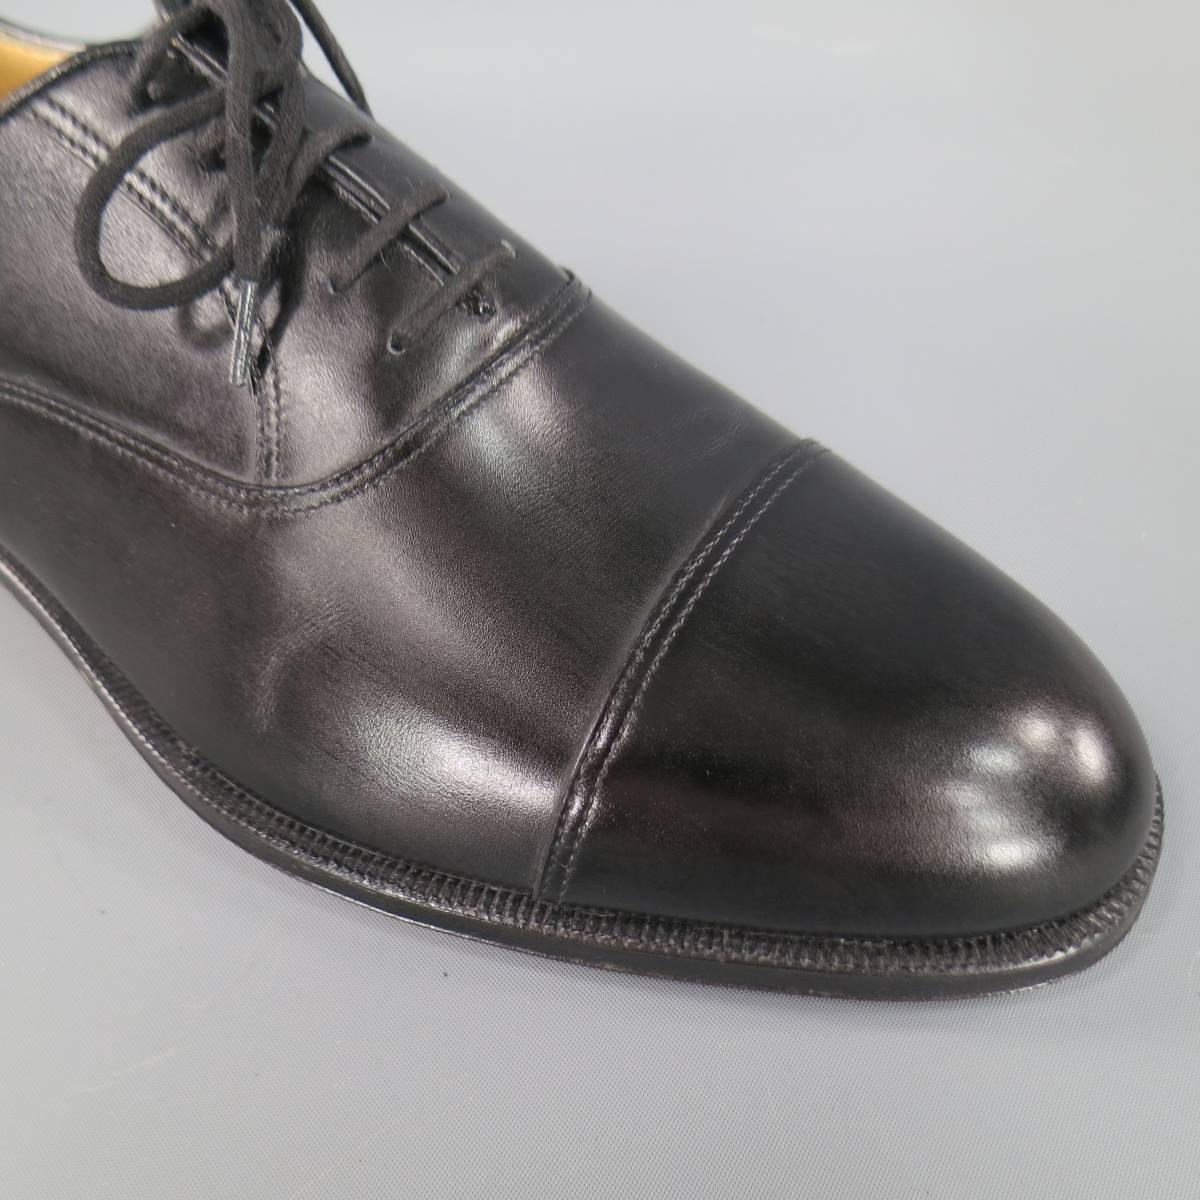 These deadstock vintage GRAVATI dress shoes come in smooth black leather with a cap toe, tan leather lining, and low heel. Made in Italy.
 
New with Box.
Marked: 8 1/2 M
 
11.45 in. X 4 in.